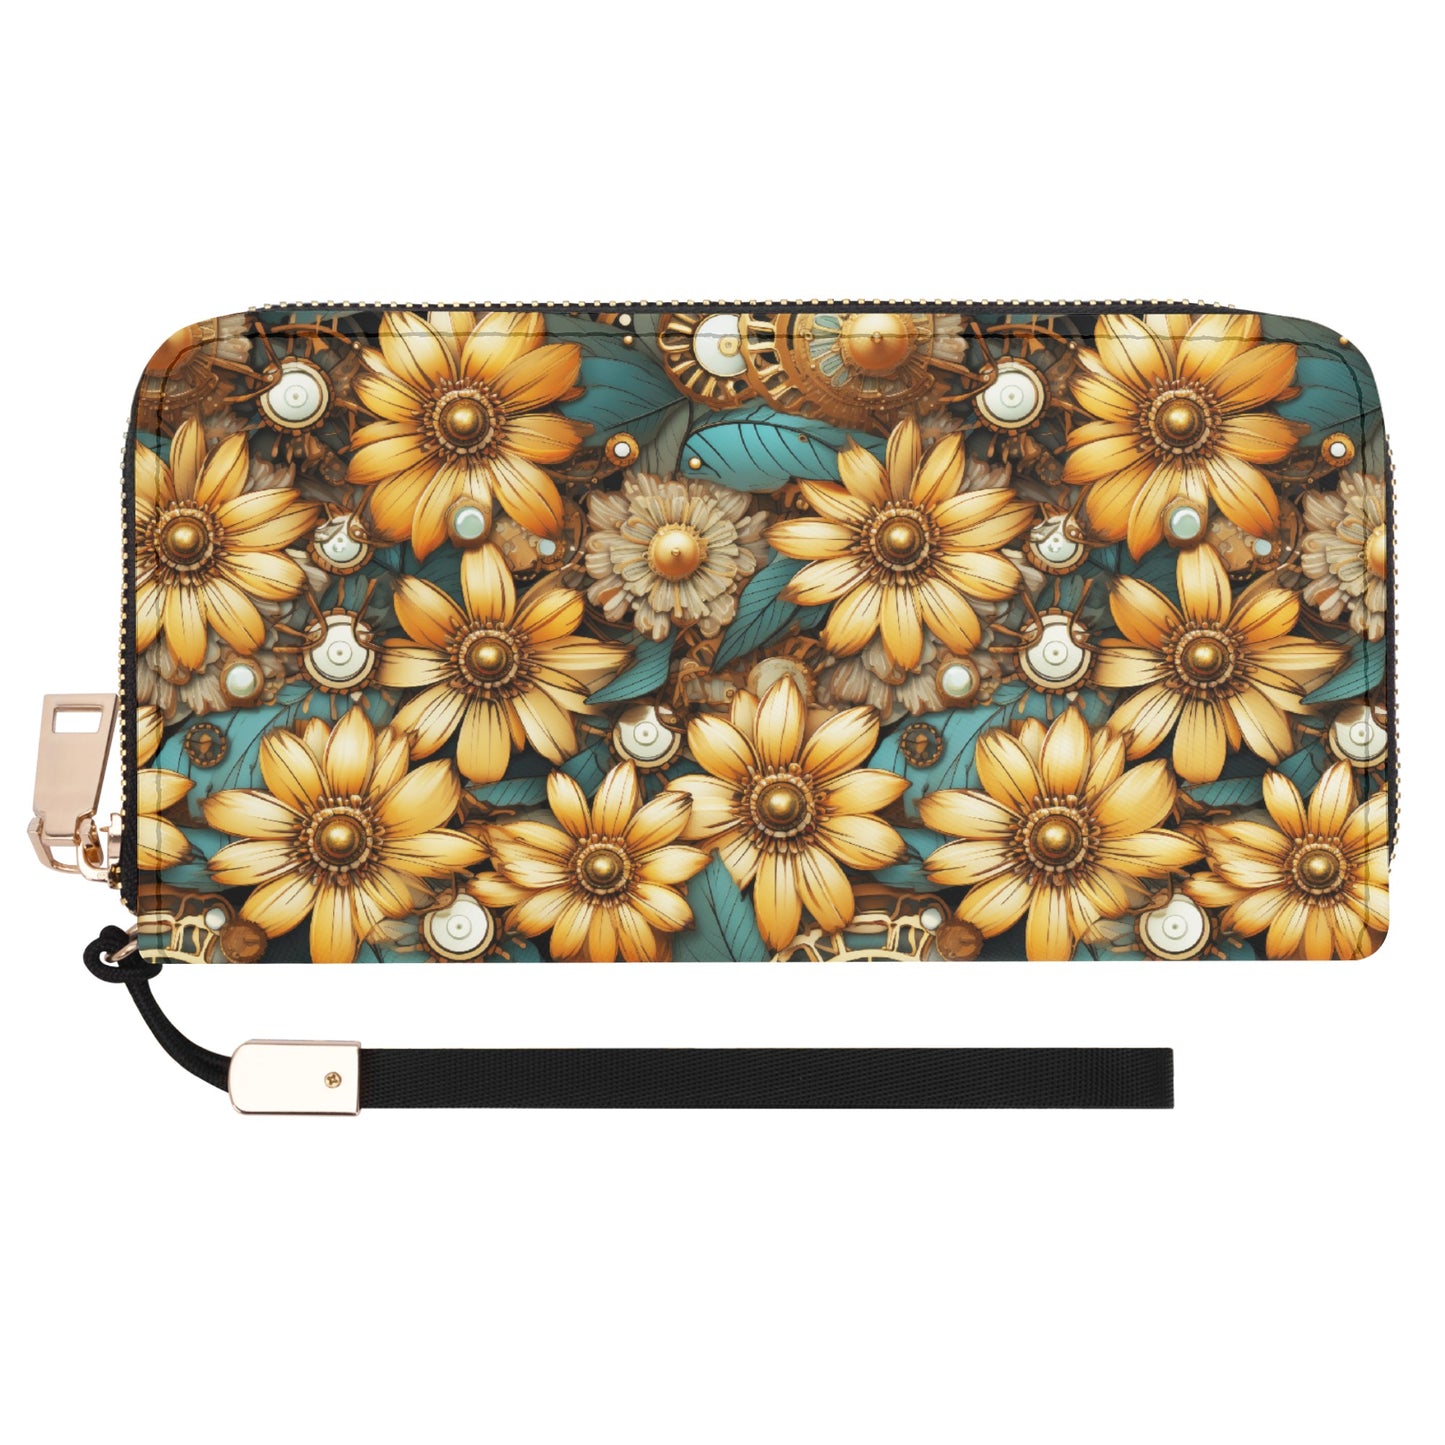 Victorian Steampunk Gold Flowers Teal Background with Gears and Mechanical Elements - Wristlet Wallet Leather (PU)